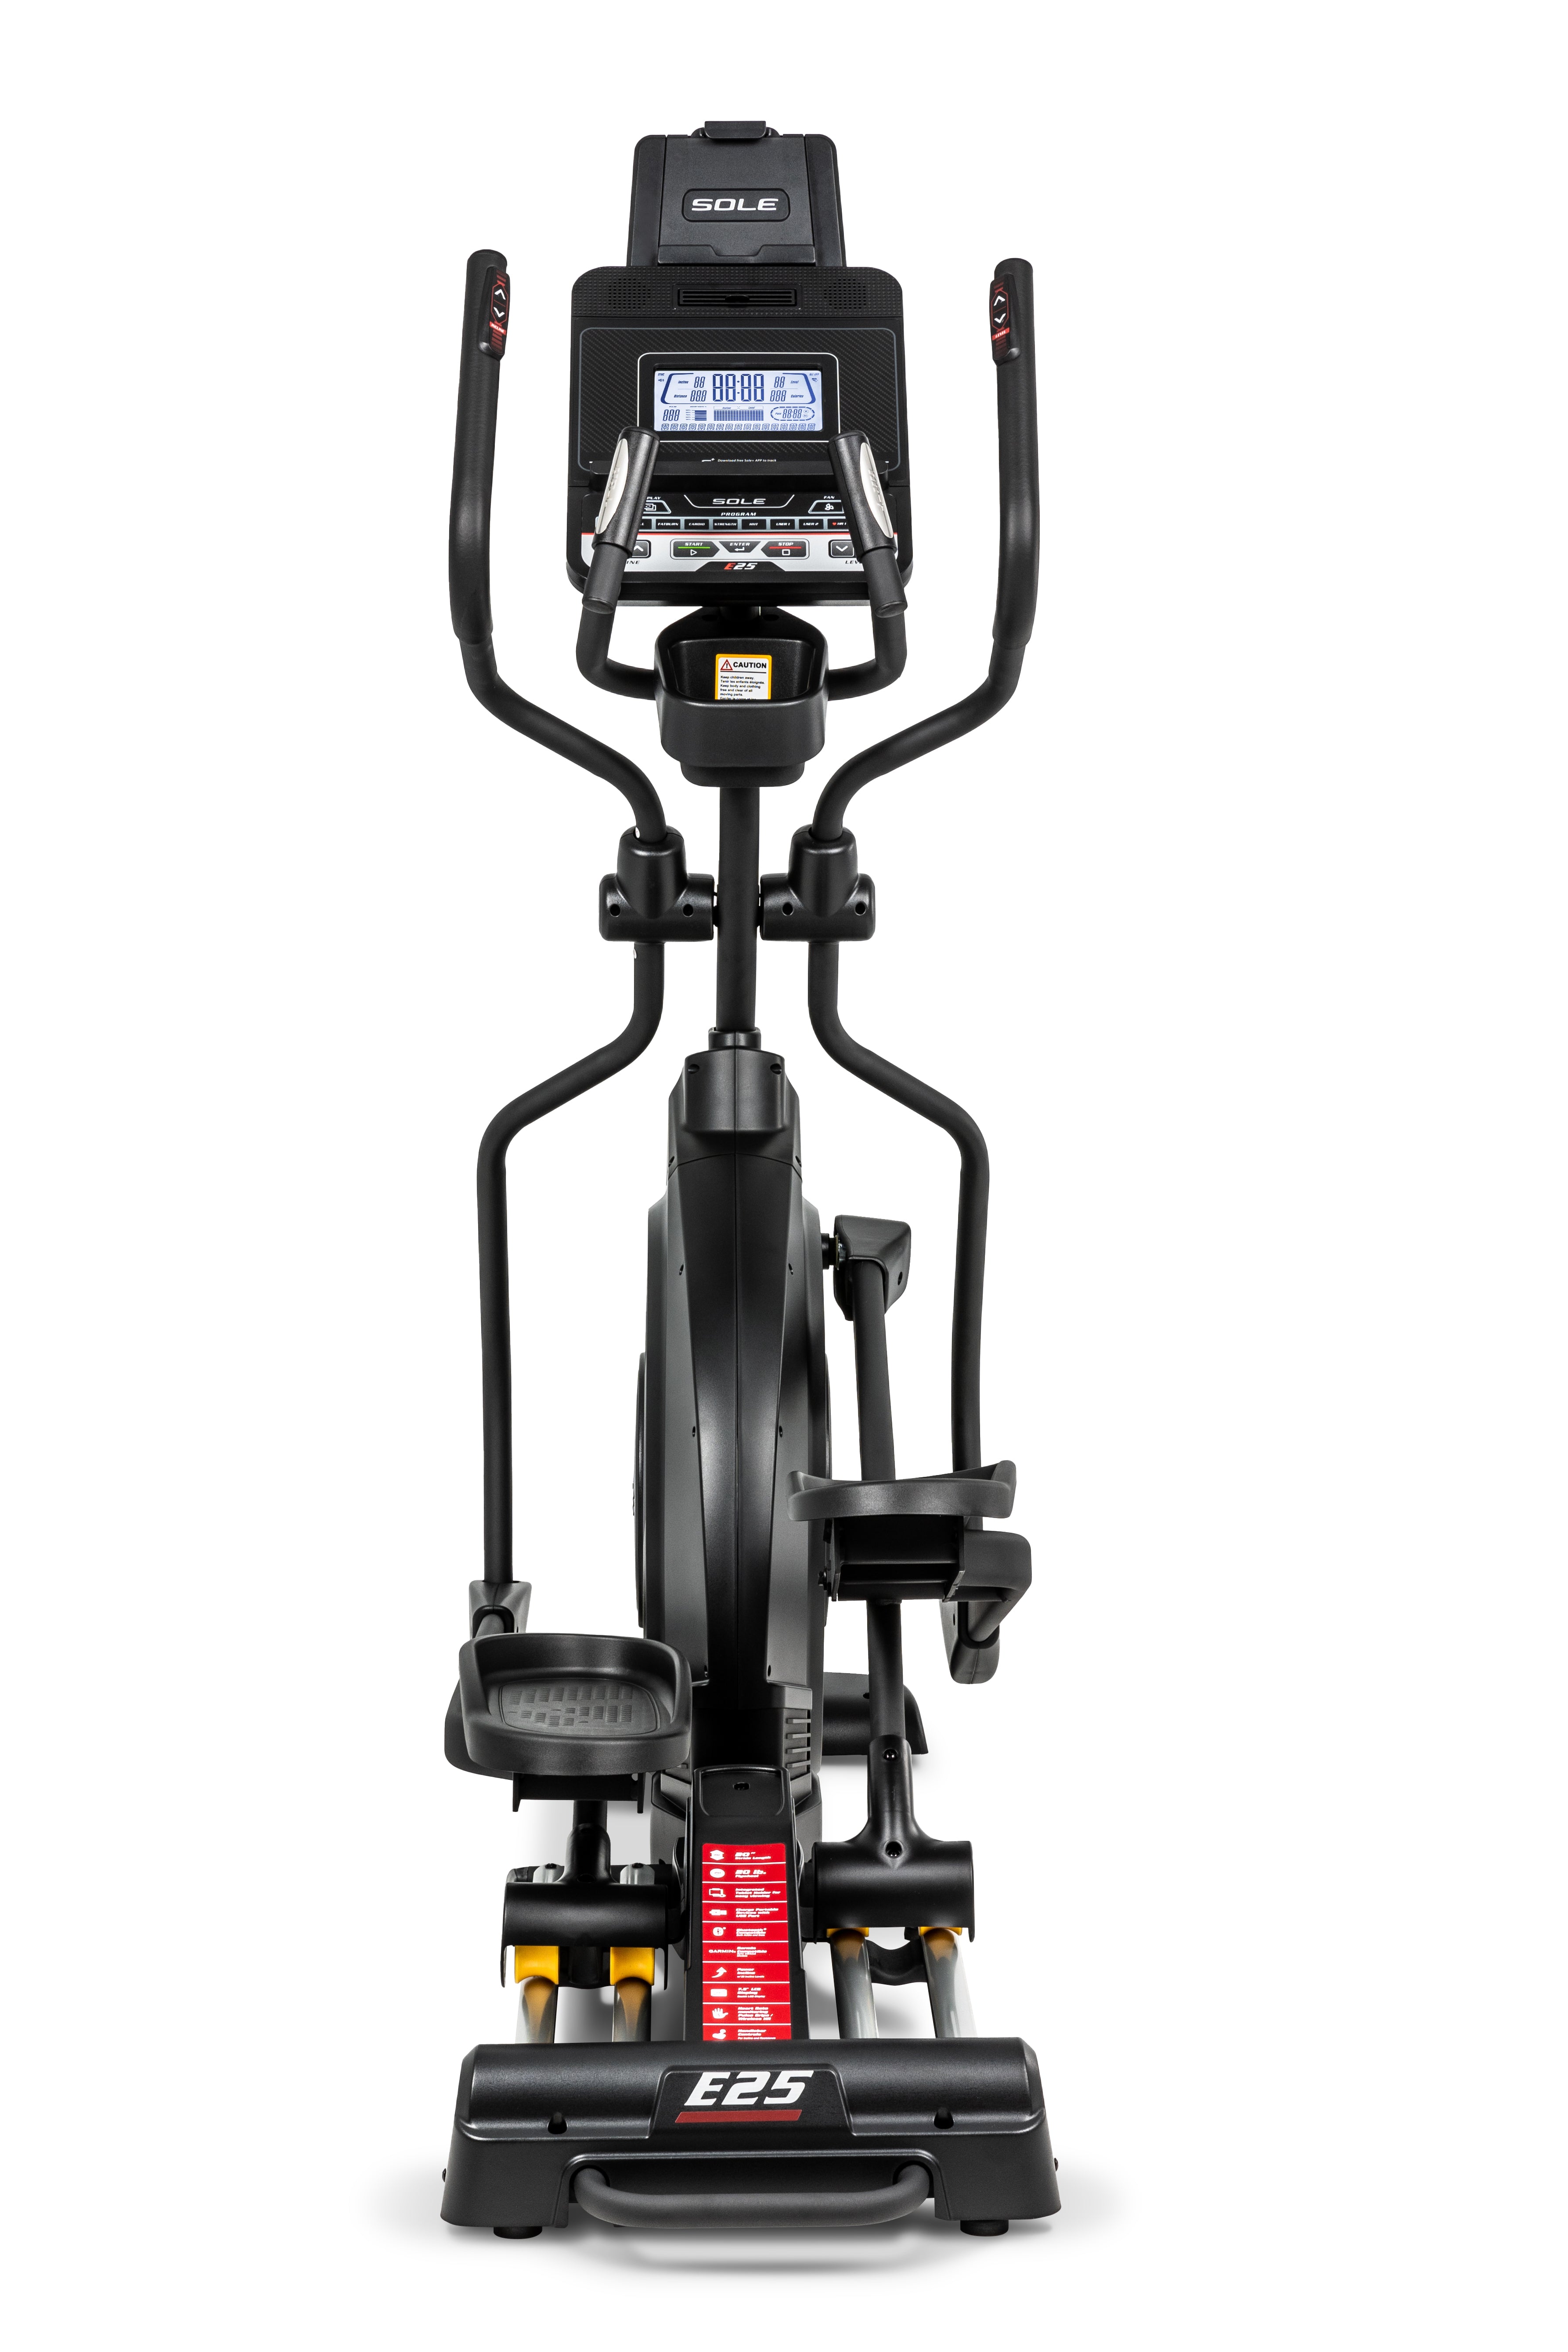 Frontal view of the Sole E25 elliptical trainer displaying its digital control panel with workout data, dual handlebars, black frame, adjustable foot pedals, and the 'E25' branding on the base, all set against a white backdrop.